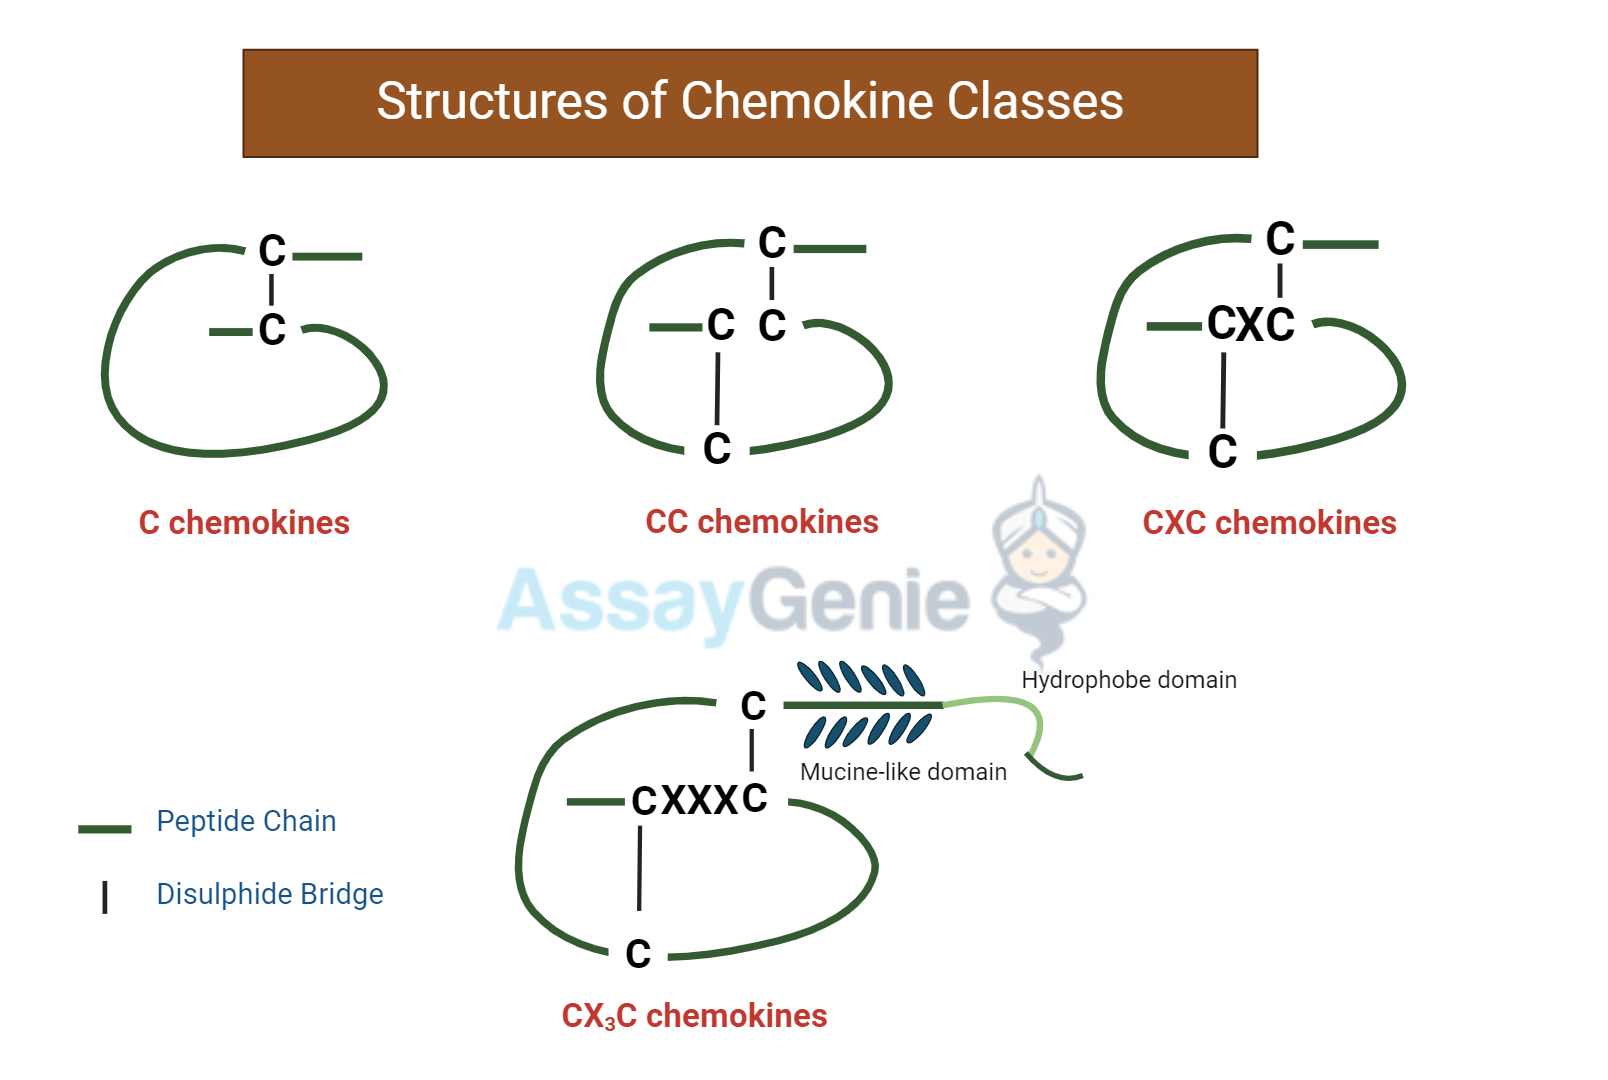 Structures of chemokines classes